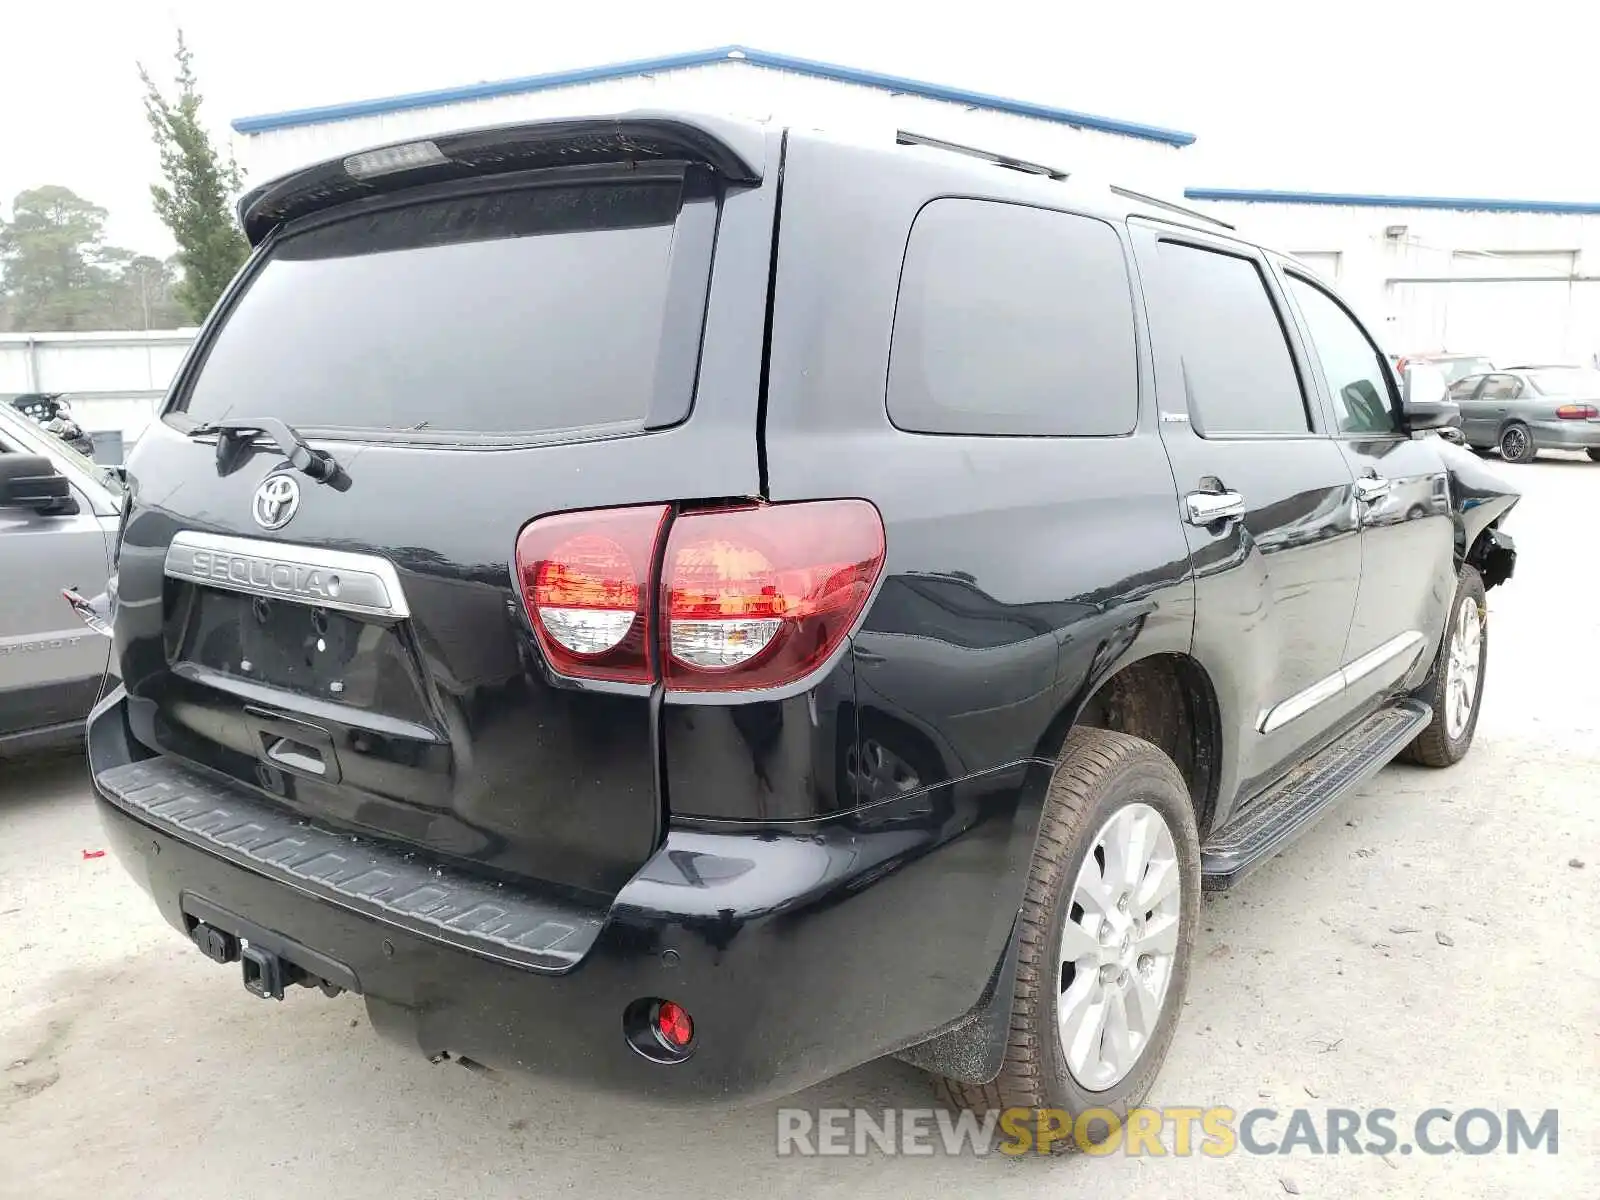 4 Photograph of a damaged car 5TDDY5G11KS167411 TOYOTA SEQUOIA 2019